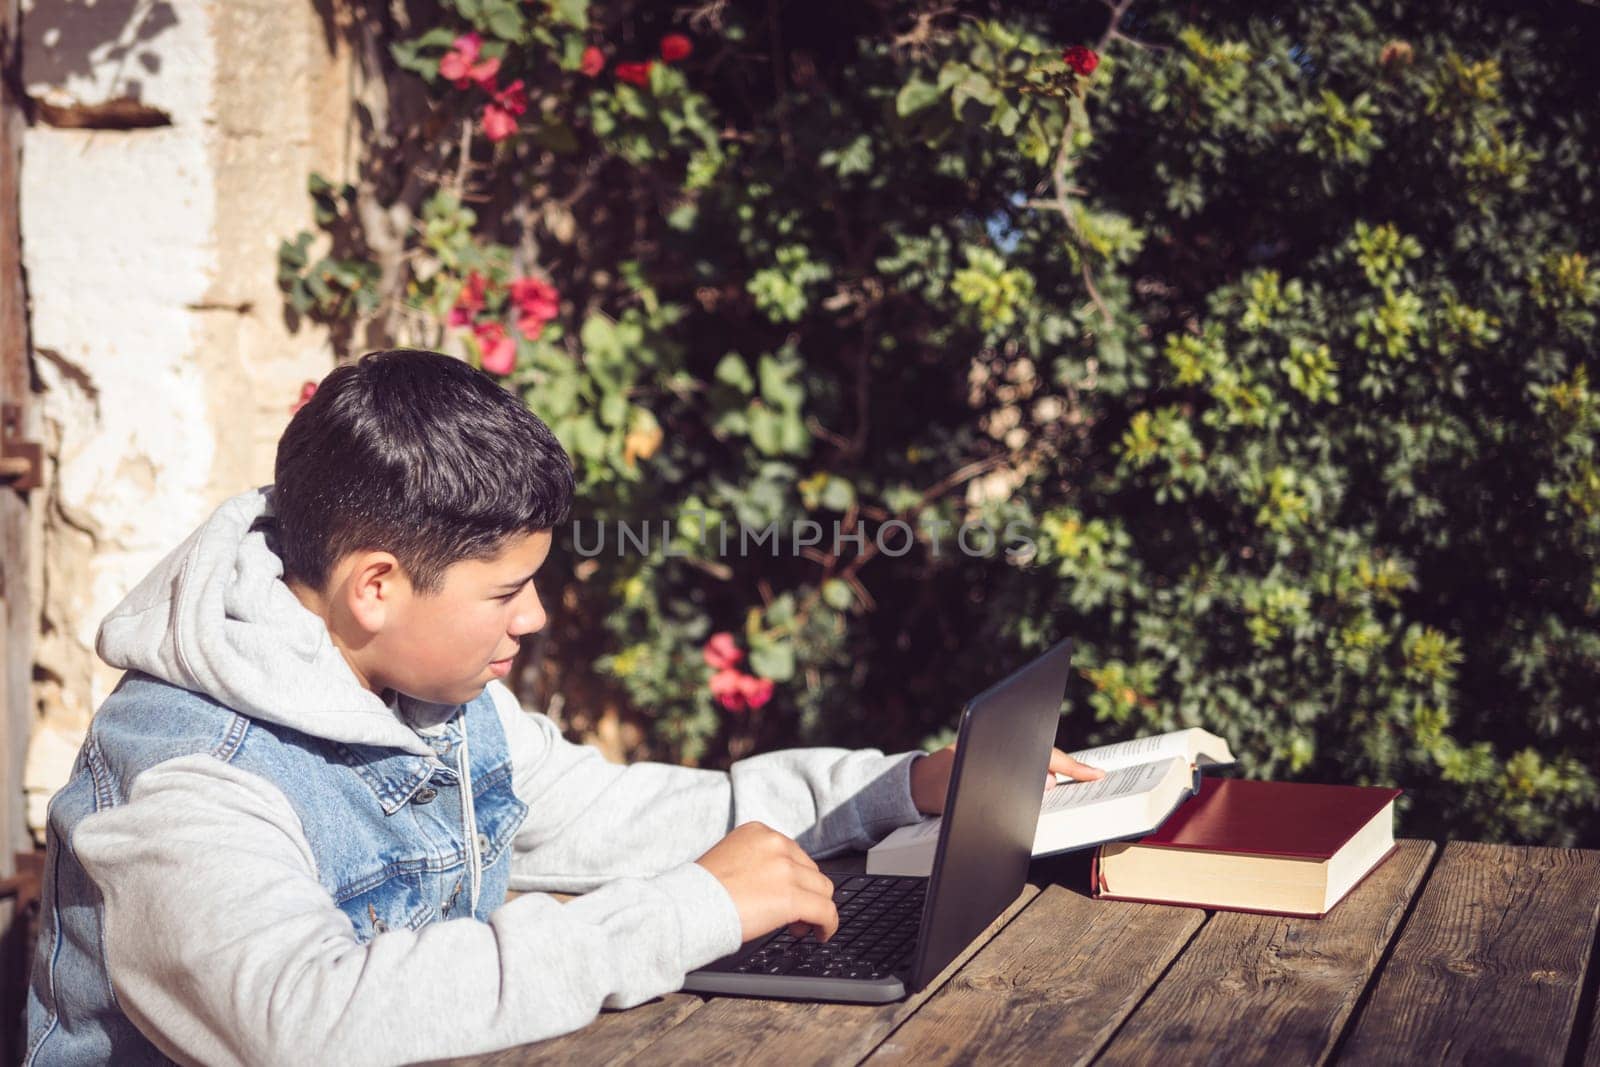 young latin man reads book in front of laptop, outdoors in city park, doing high school study work